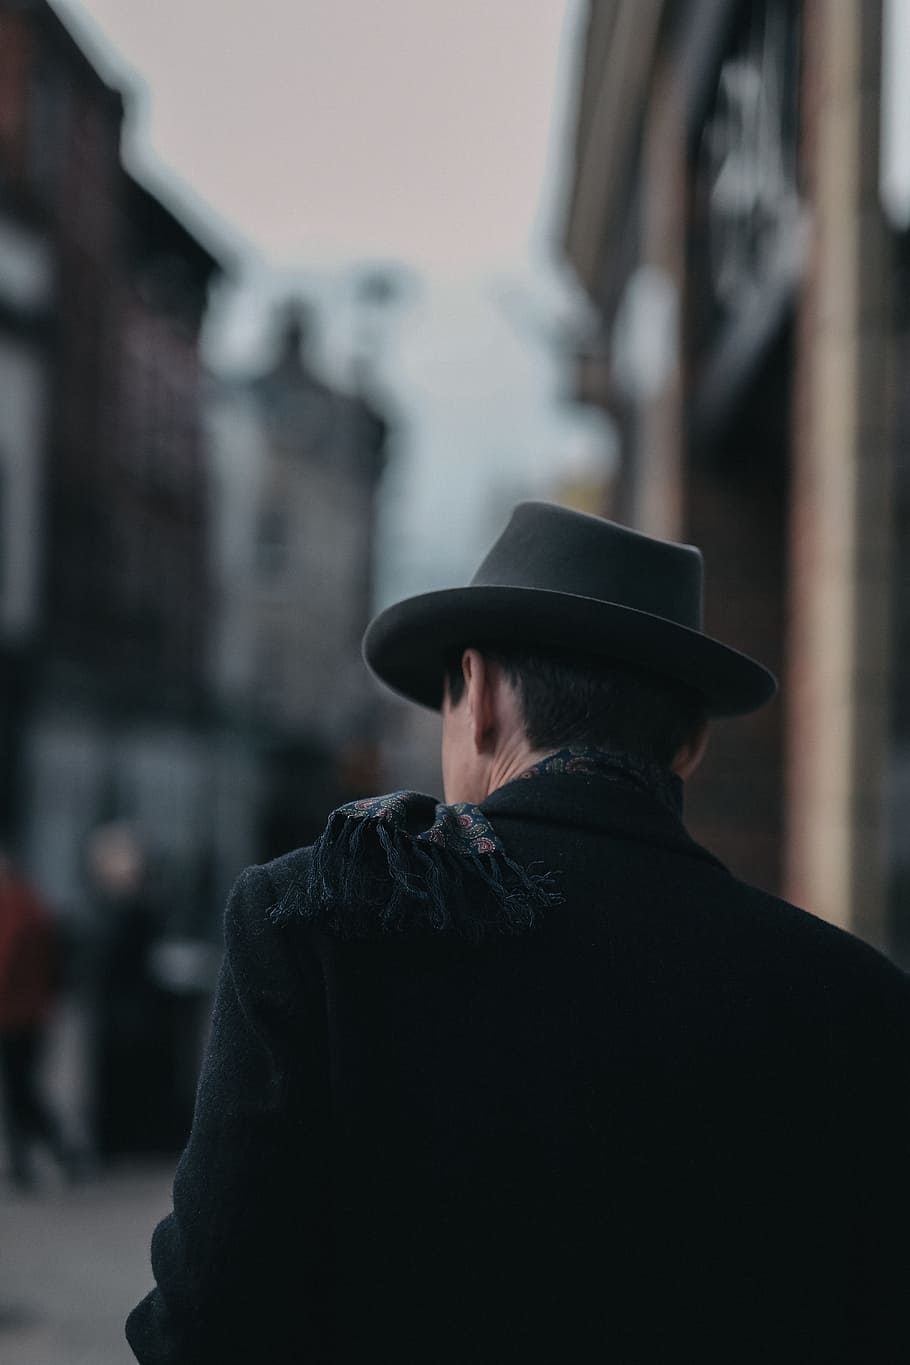 back view of man selective photo, man in black hat with coat